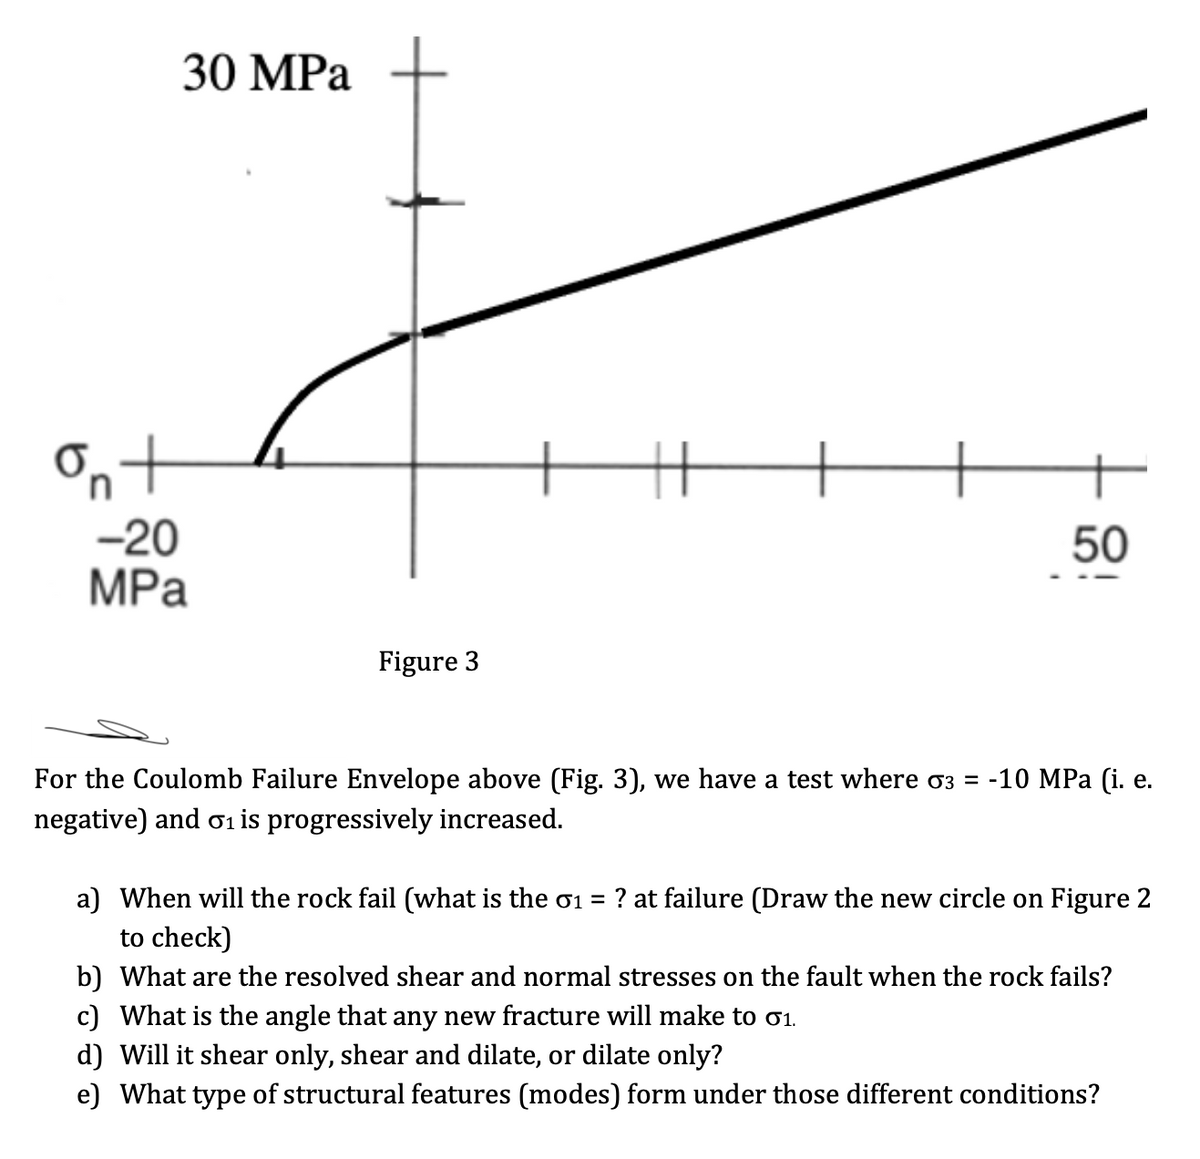 30 MPа
-20
MPа
50
Figure 3
For the Coulomb Failure Envelope above (Fig. 3), we have a test where 03 = -10 MPa (i. e.
negative) and o1 is progressively increased.
? at failure (Draw the new circle on Figure 2
a) When will the rock fail (what is the ơ1 =
to check)
b) What are the resolved shear and normal stresses on the fault when the rock fails?
c) What is the angle that any new fracture will make to 01.
d) Will it shear only, shear and dilate, or dilate only?
e) What type of structural features (modes) form under those different conditions?
